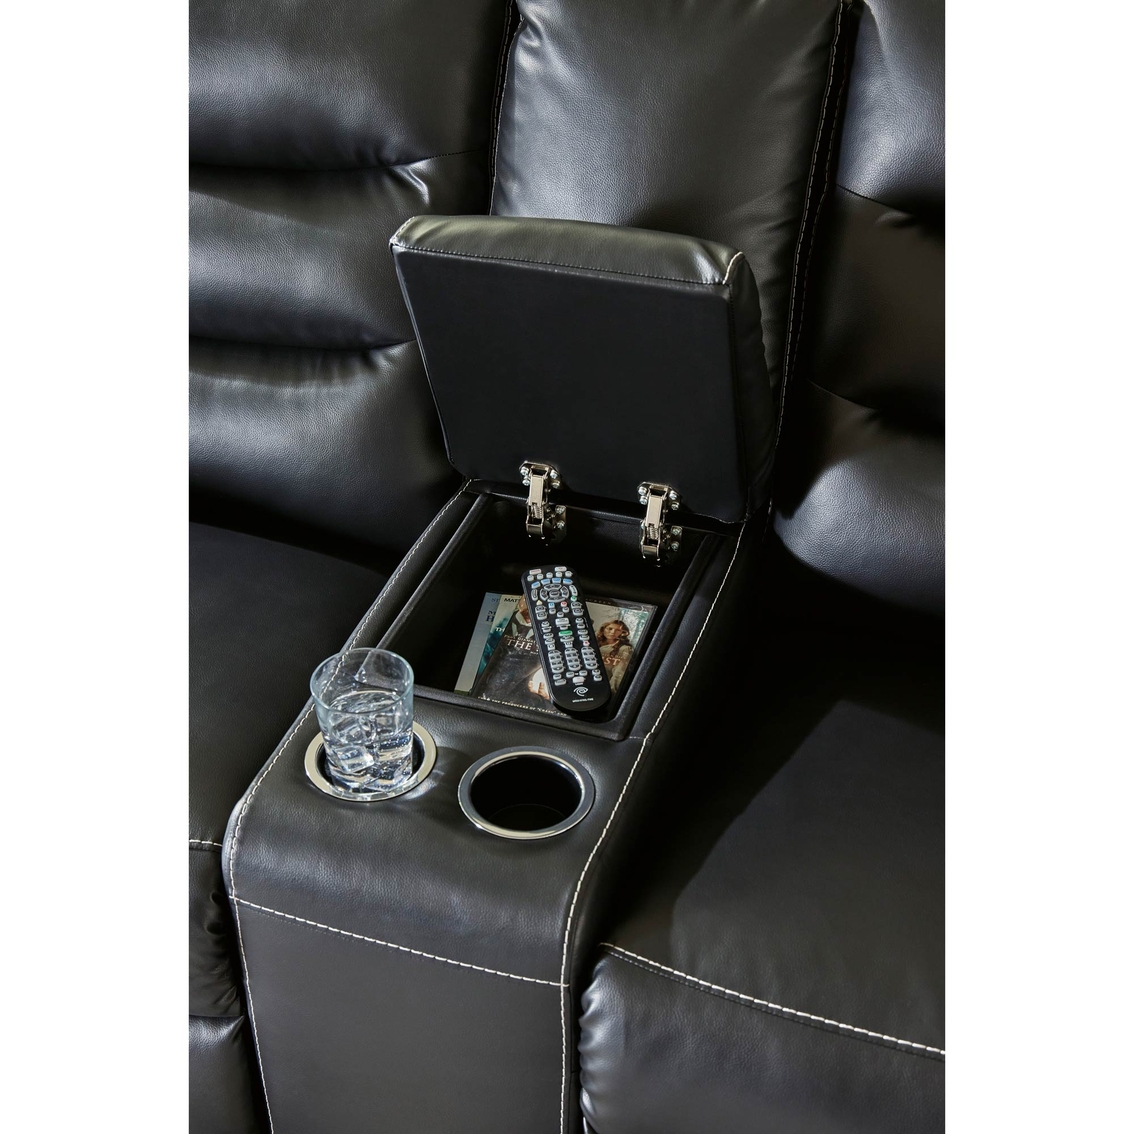 Signature Design by Ashley Warlin 3 pc. Power Reclining Set - Image 5 of 7